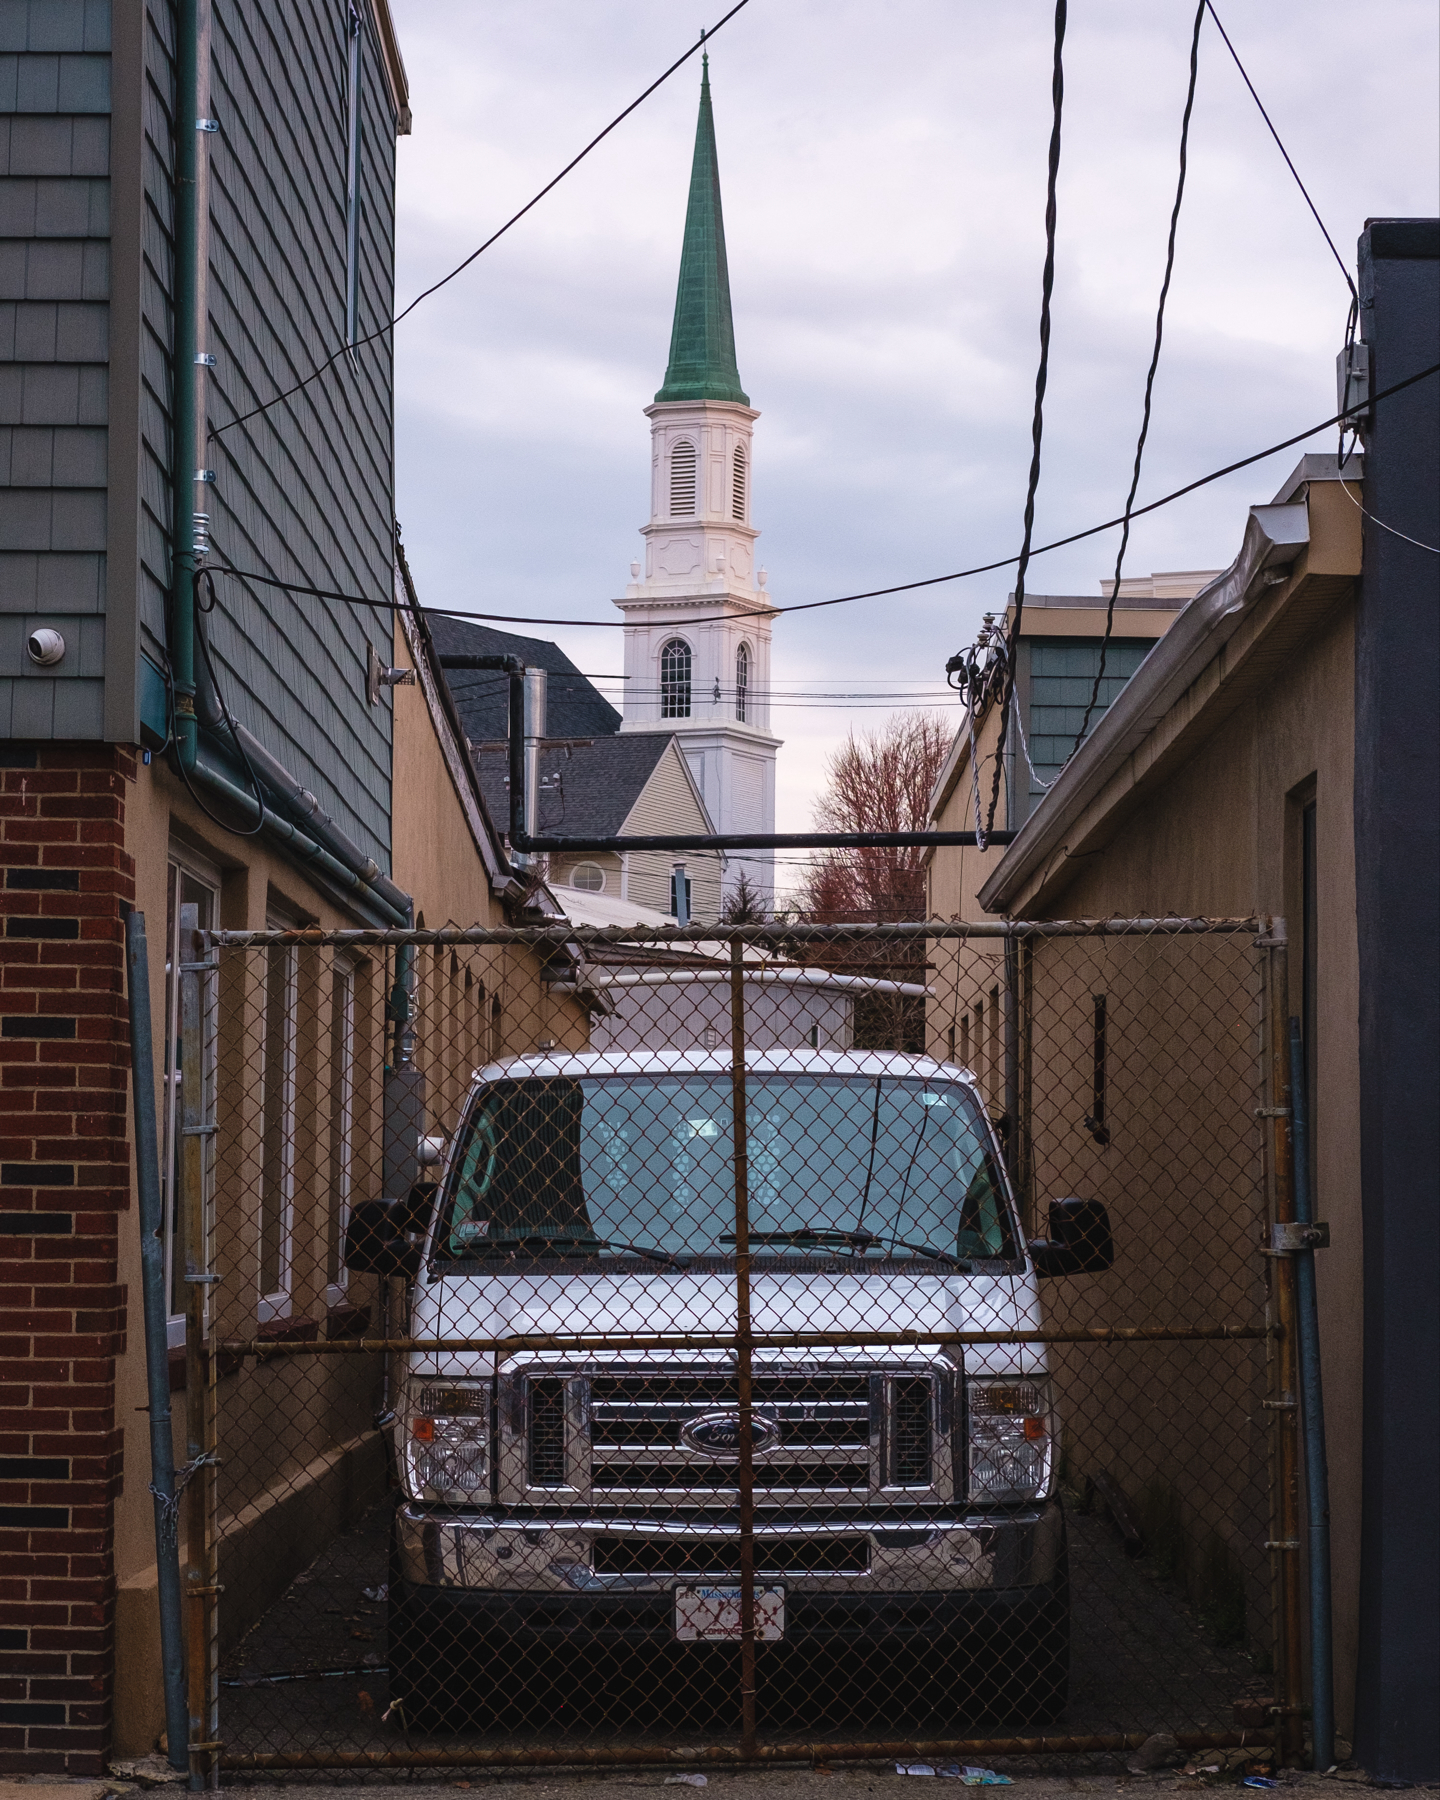 A white van parked in an alley with a chain-link gate, framed by buildings on either side, and a church spire visible in the background.